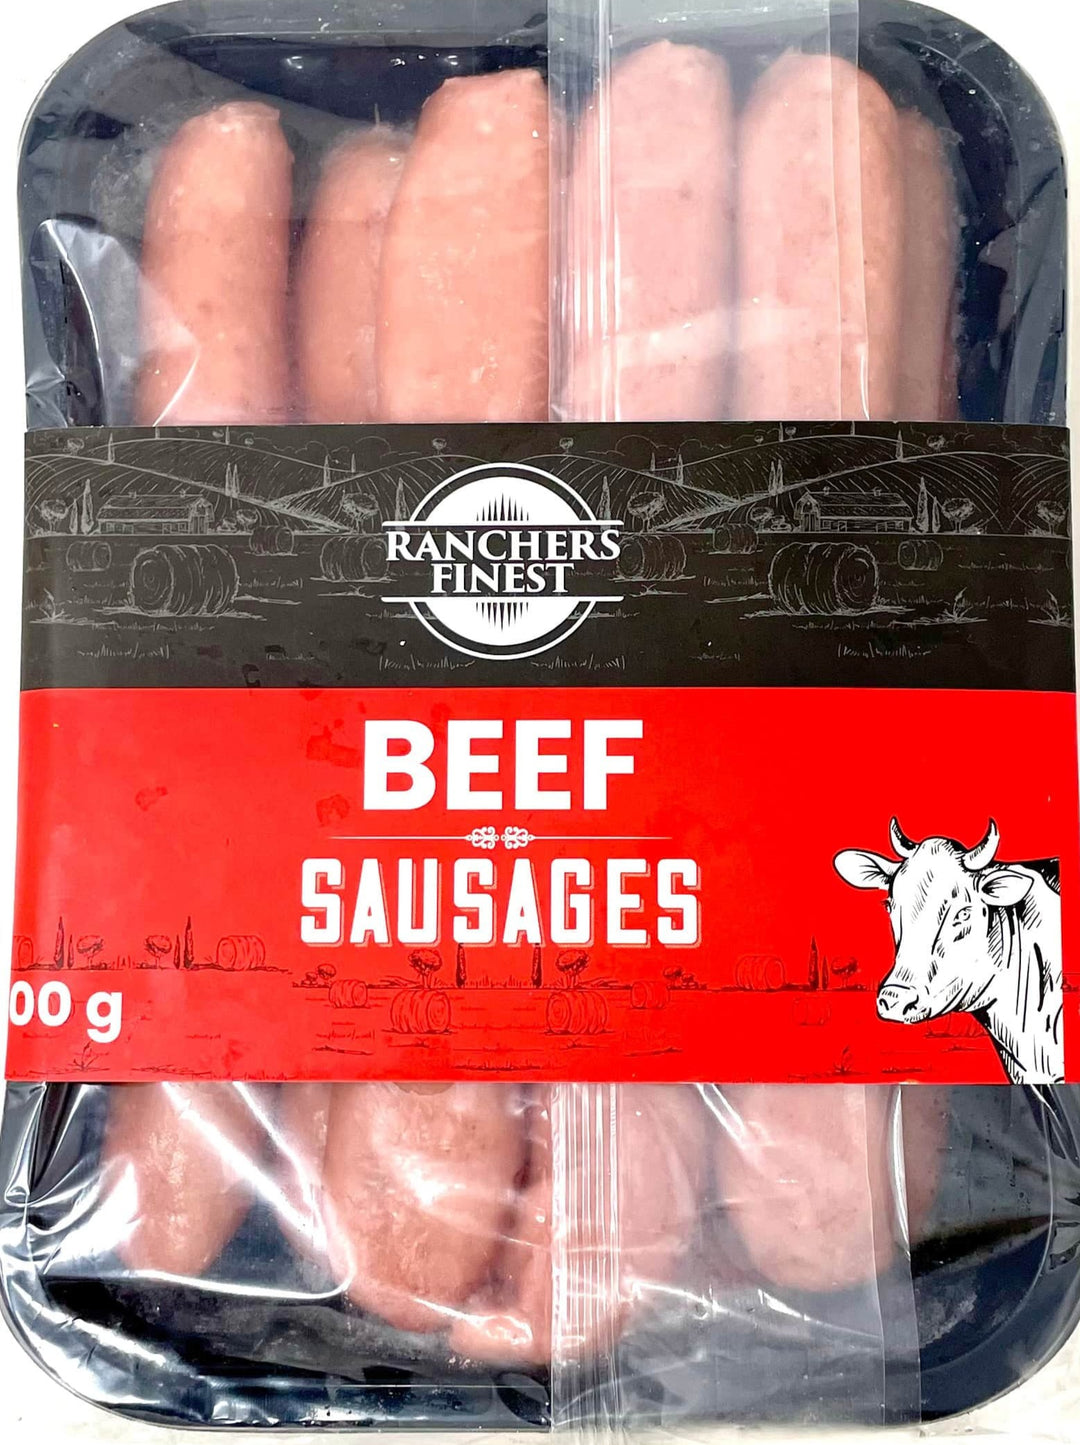 Ranchers Finest Beef Sausages 800g